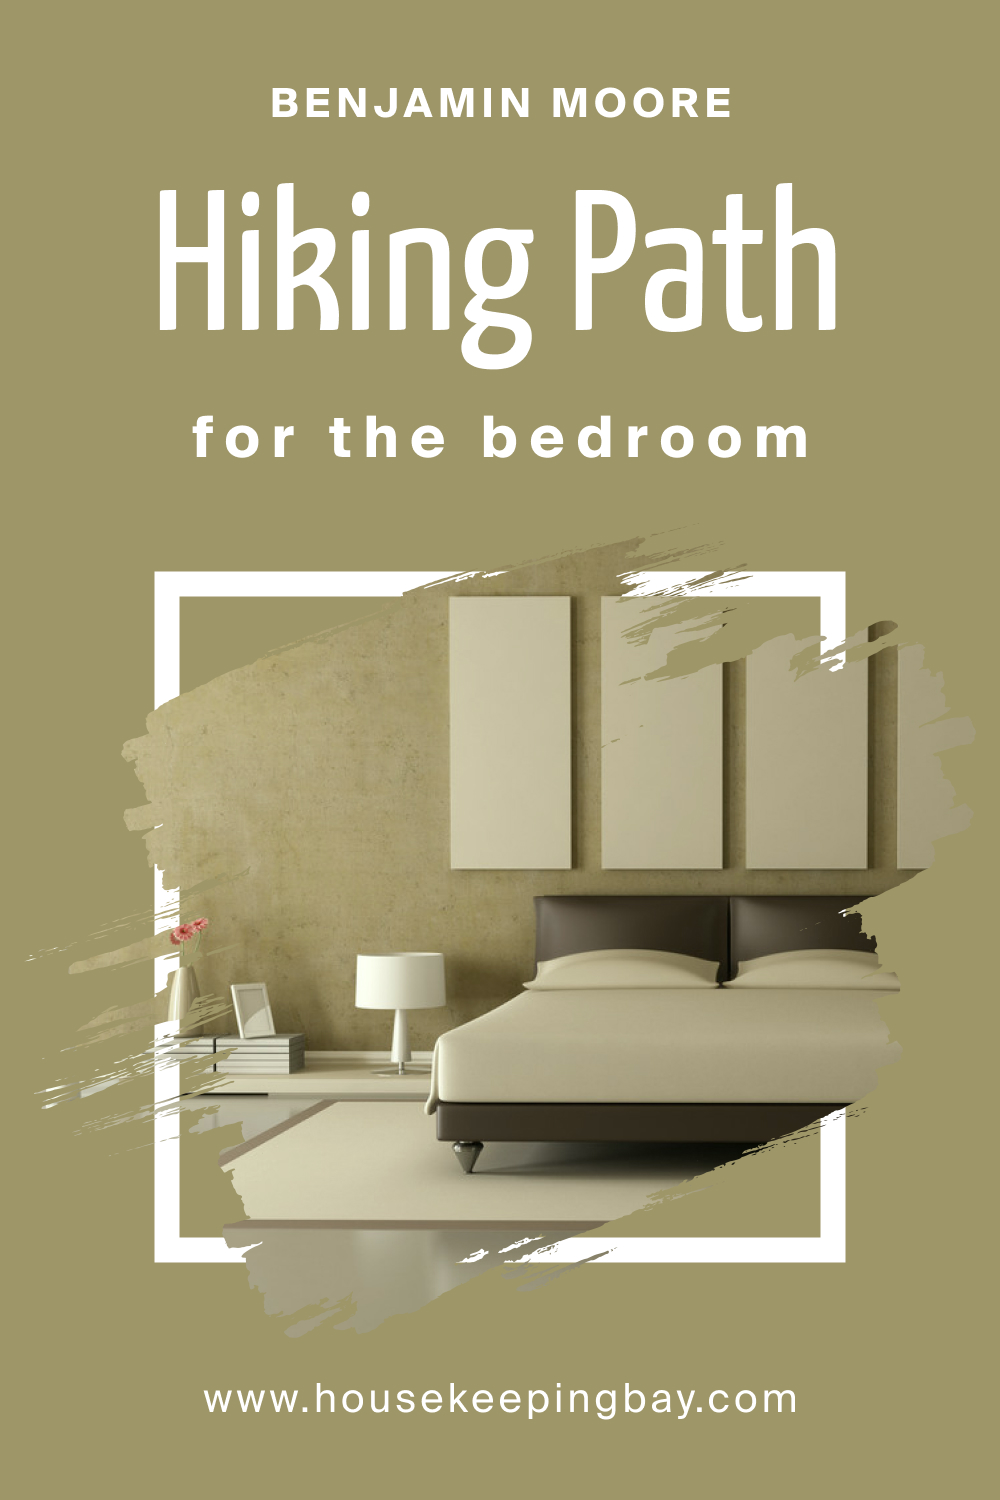 How to Use BM Hiking Path 524 in the Bedroom?